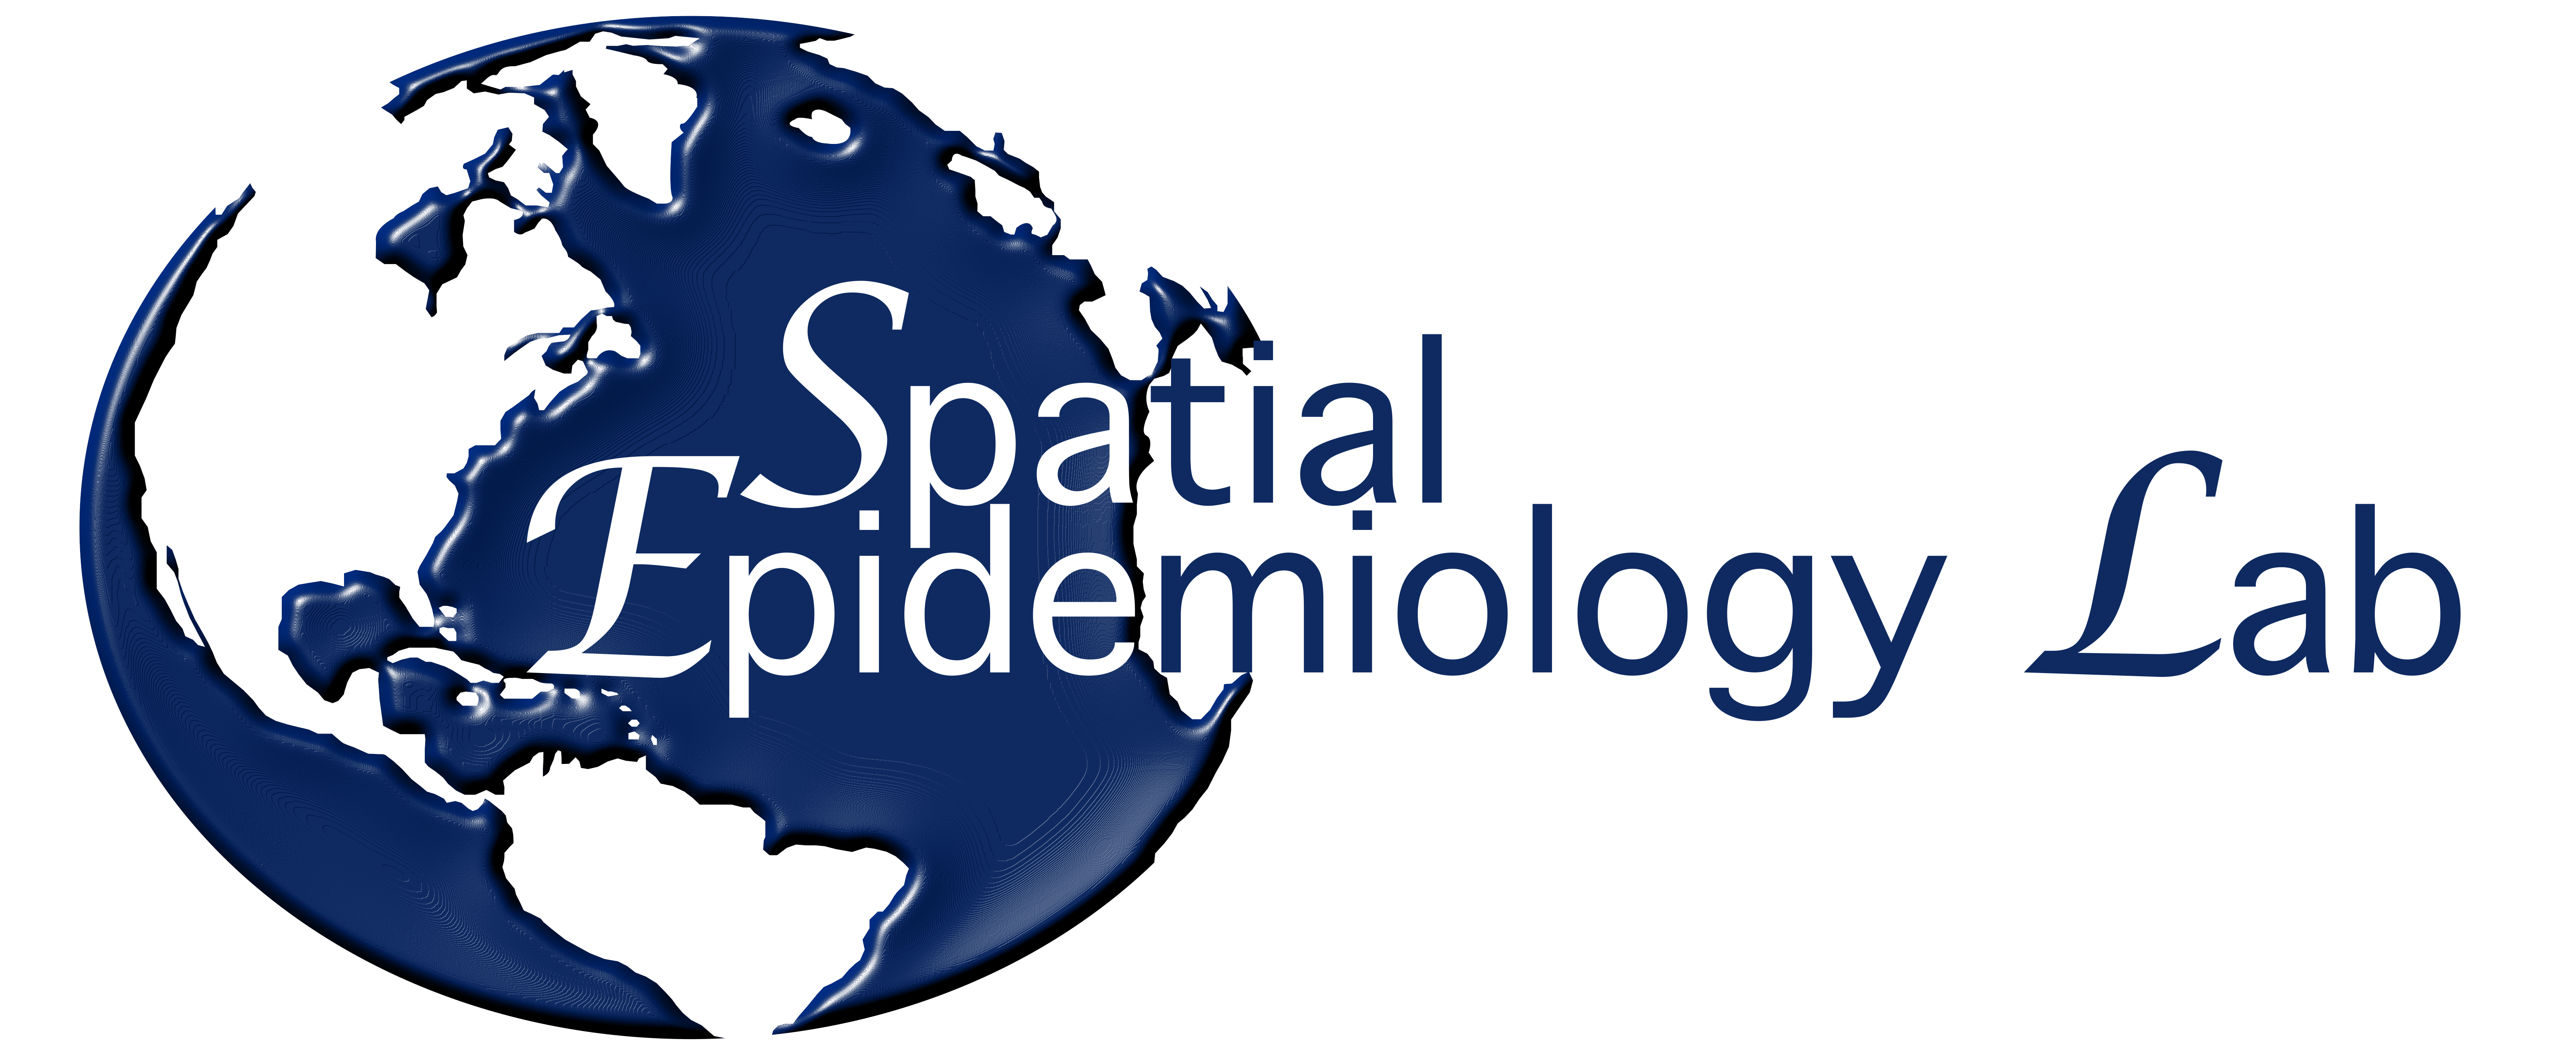 The Spatial Epidemiology Lab (SpatialEpi) is a medical geography and disease ecology research group based at the University of Queensland. A number of Master's, Honours and PhD research opportunities are available.